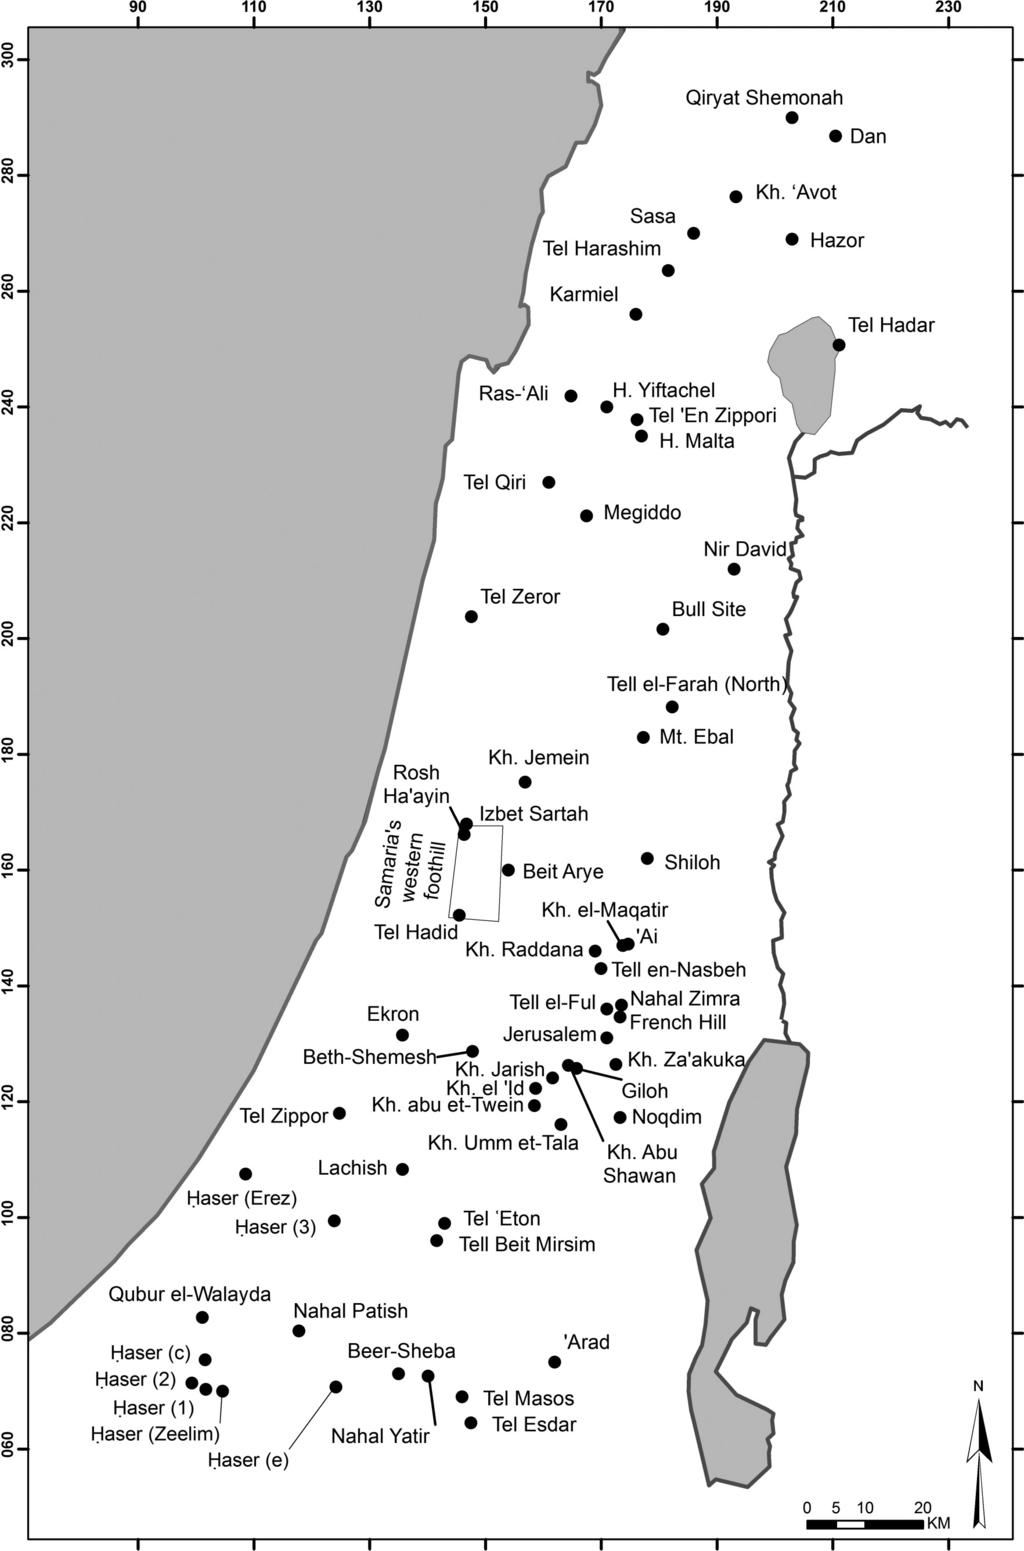 250 AVRAHAM FAUST Figure 1: A map with the sites mentioned in the text (note that the map